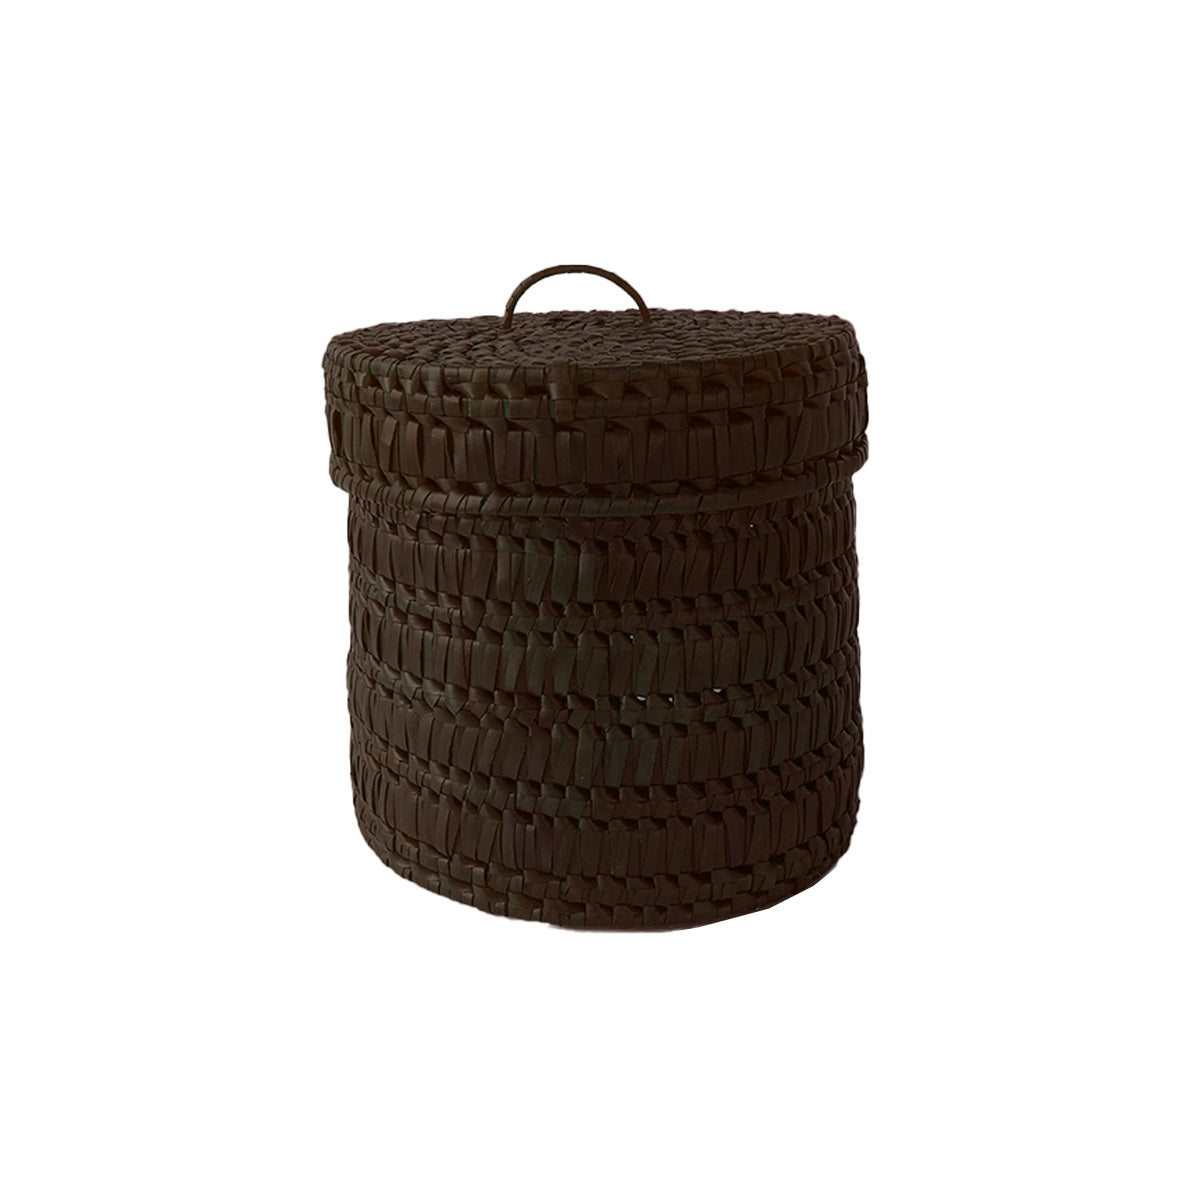 Handcrafted Palmyrah storage bin with cover - Brown - Shipping Now